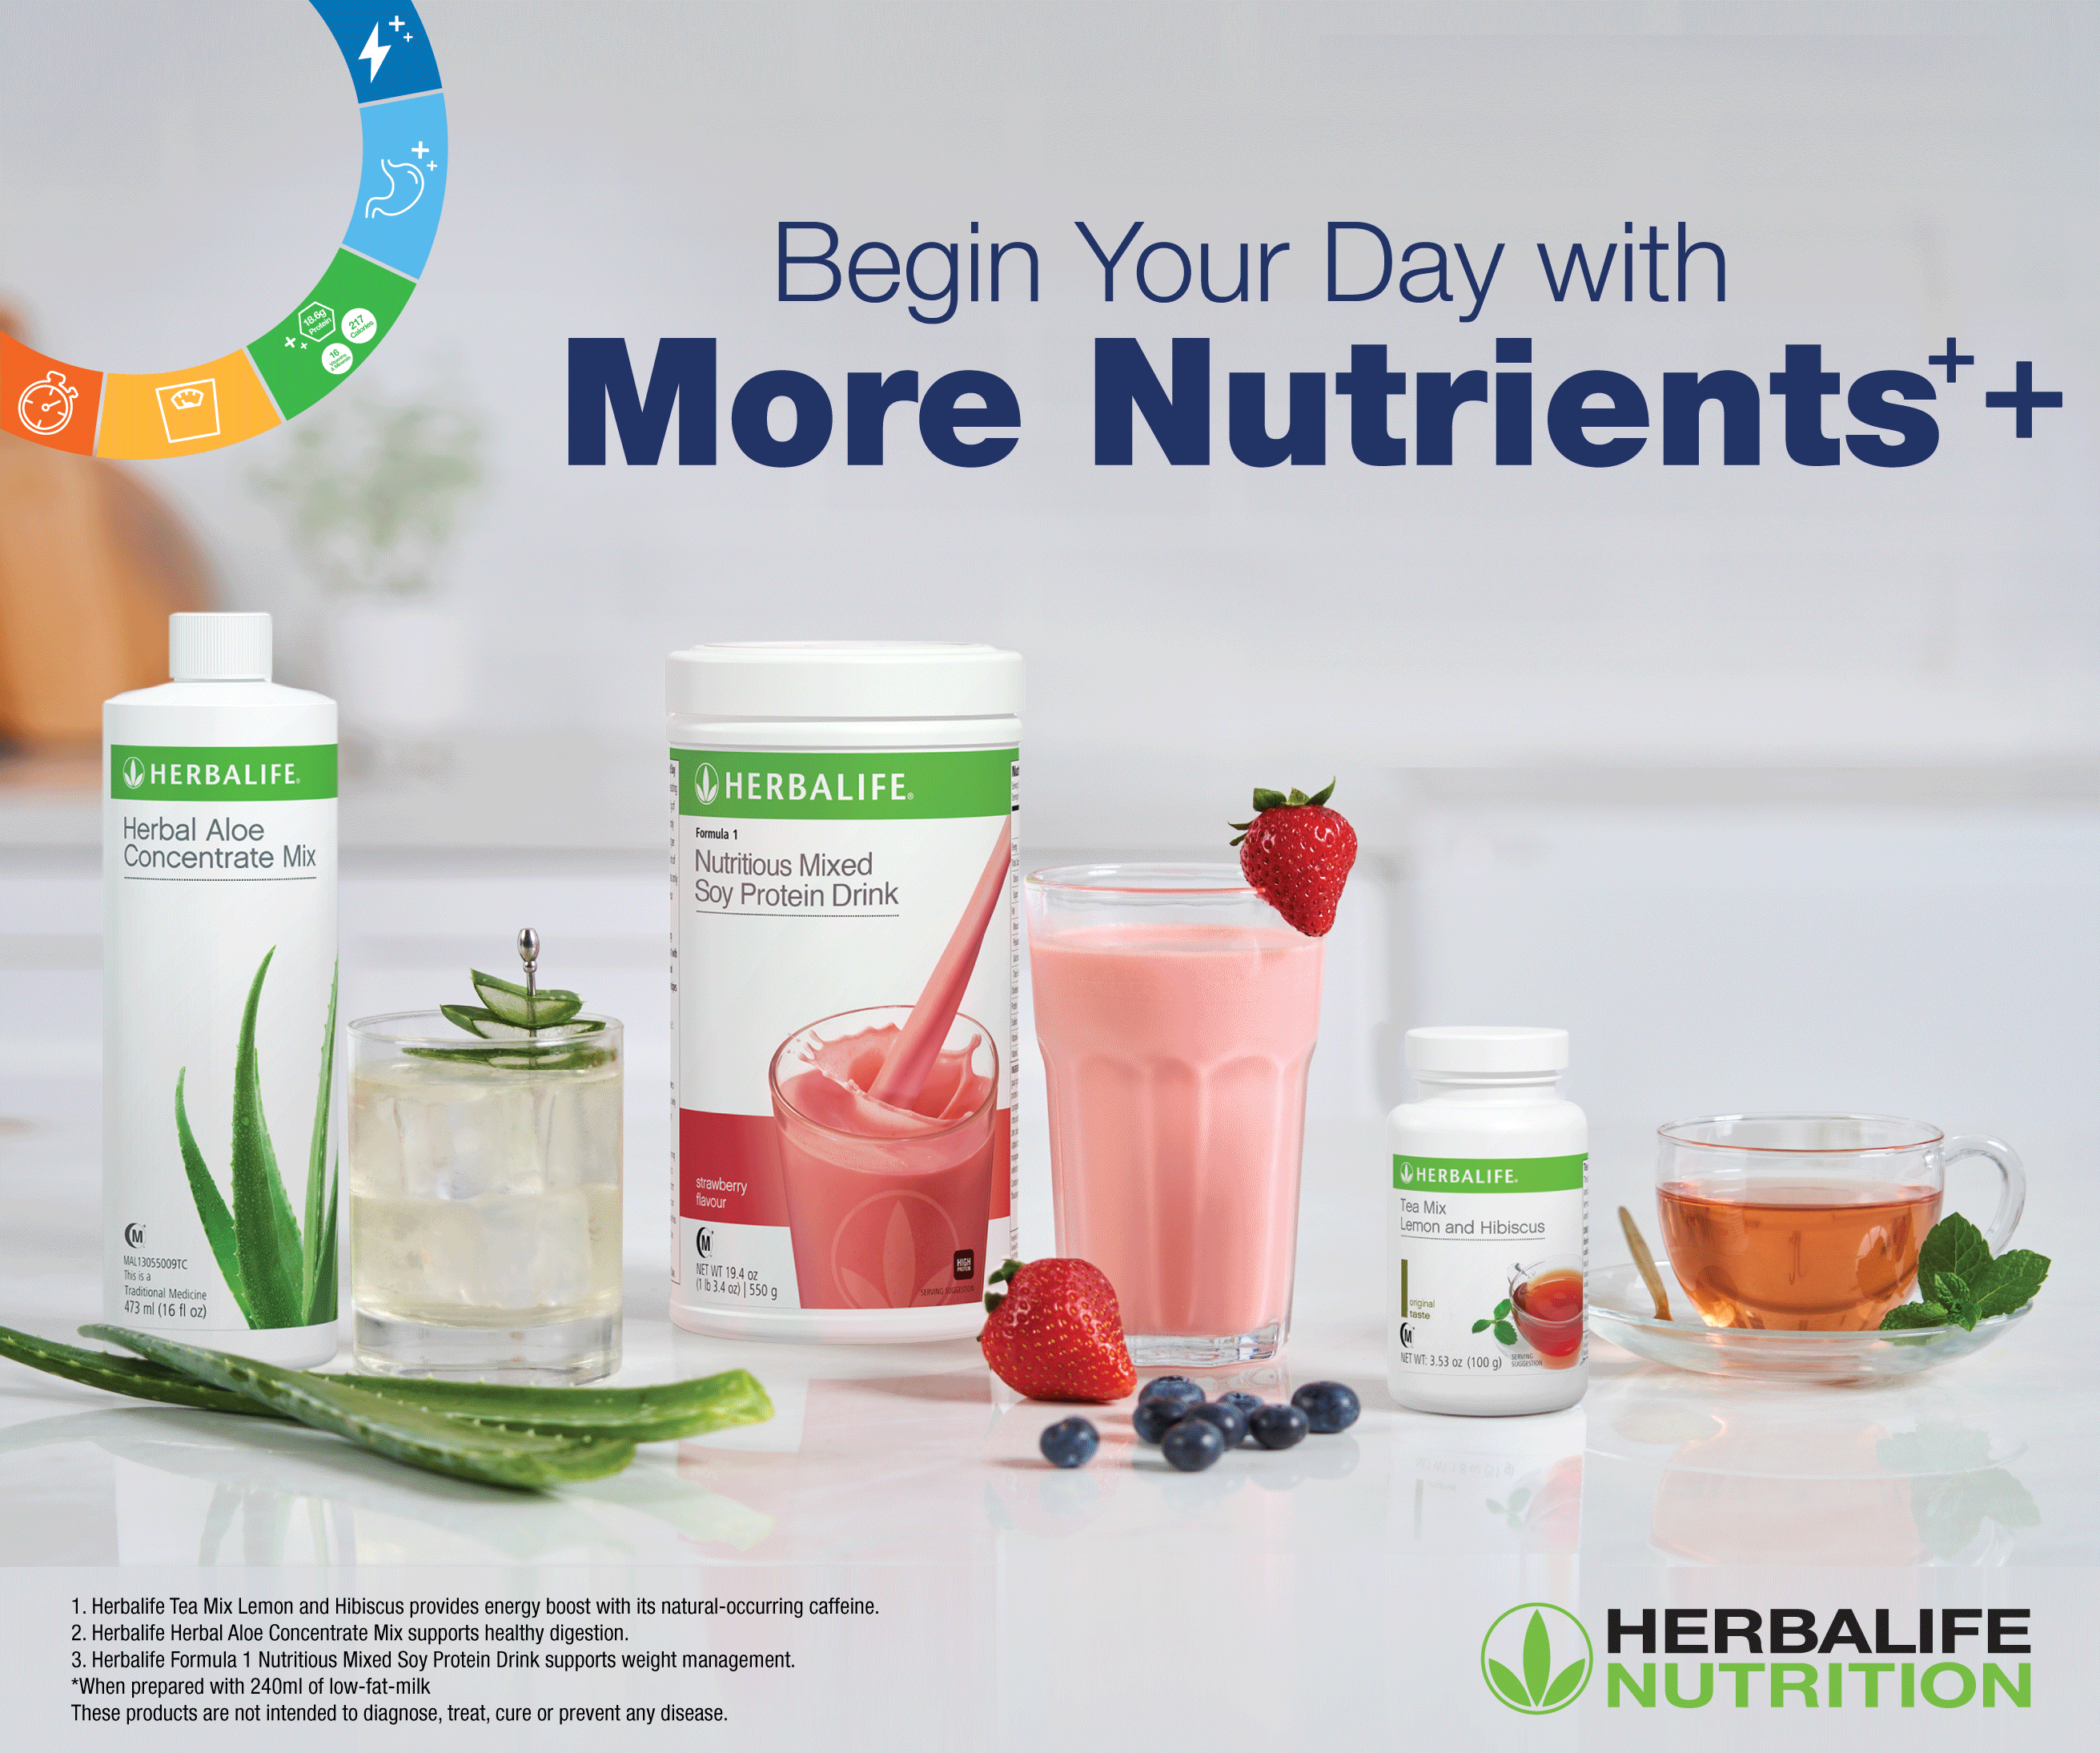 Begin your day with more nutrients with Herbalife Nutrition Healthy Breakfast